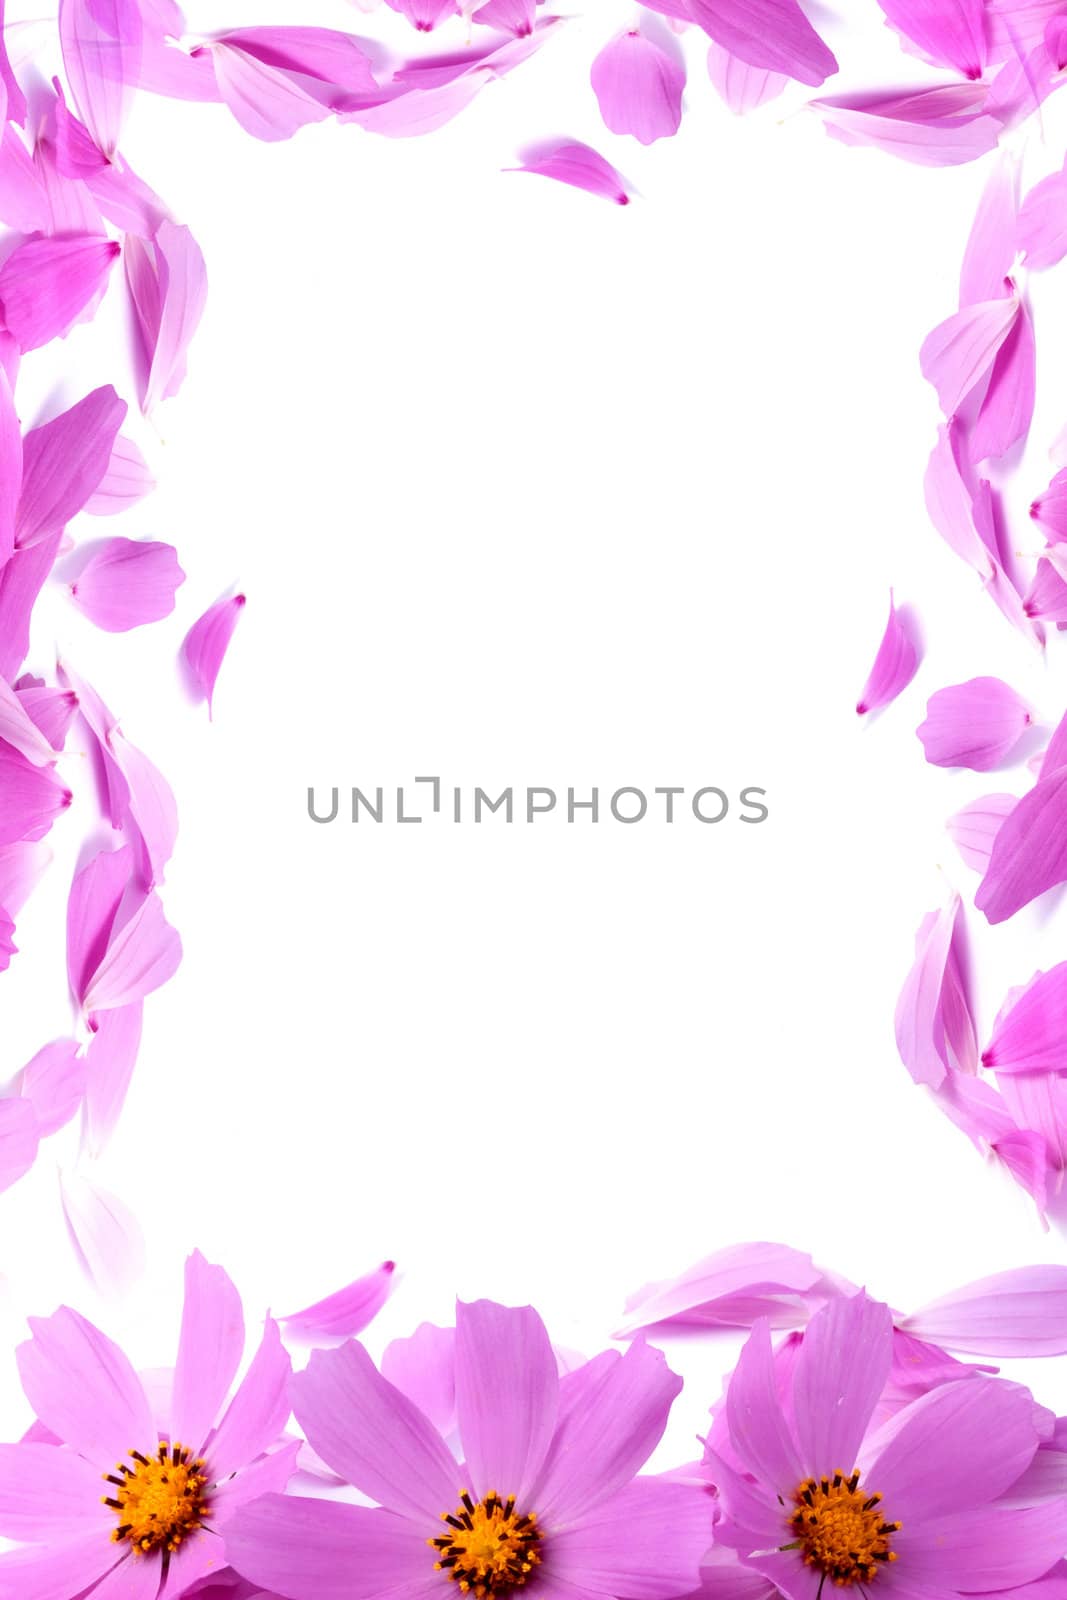 Petals of flowers isolated on white background